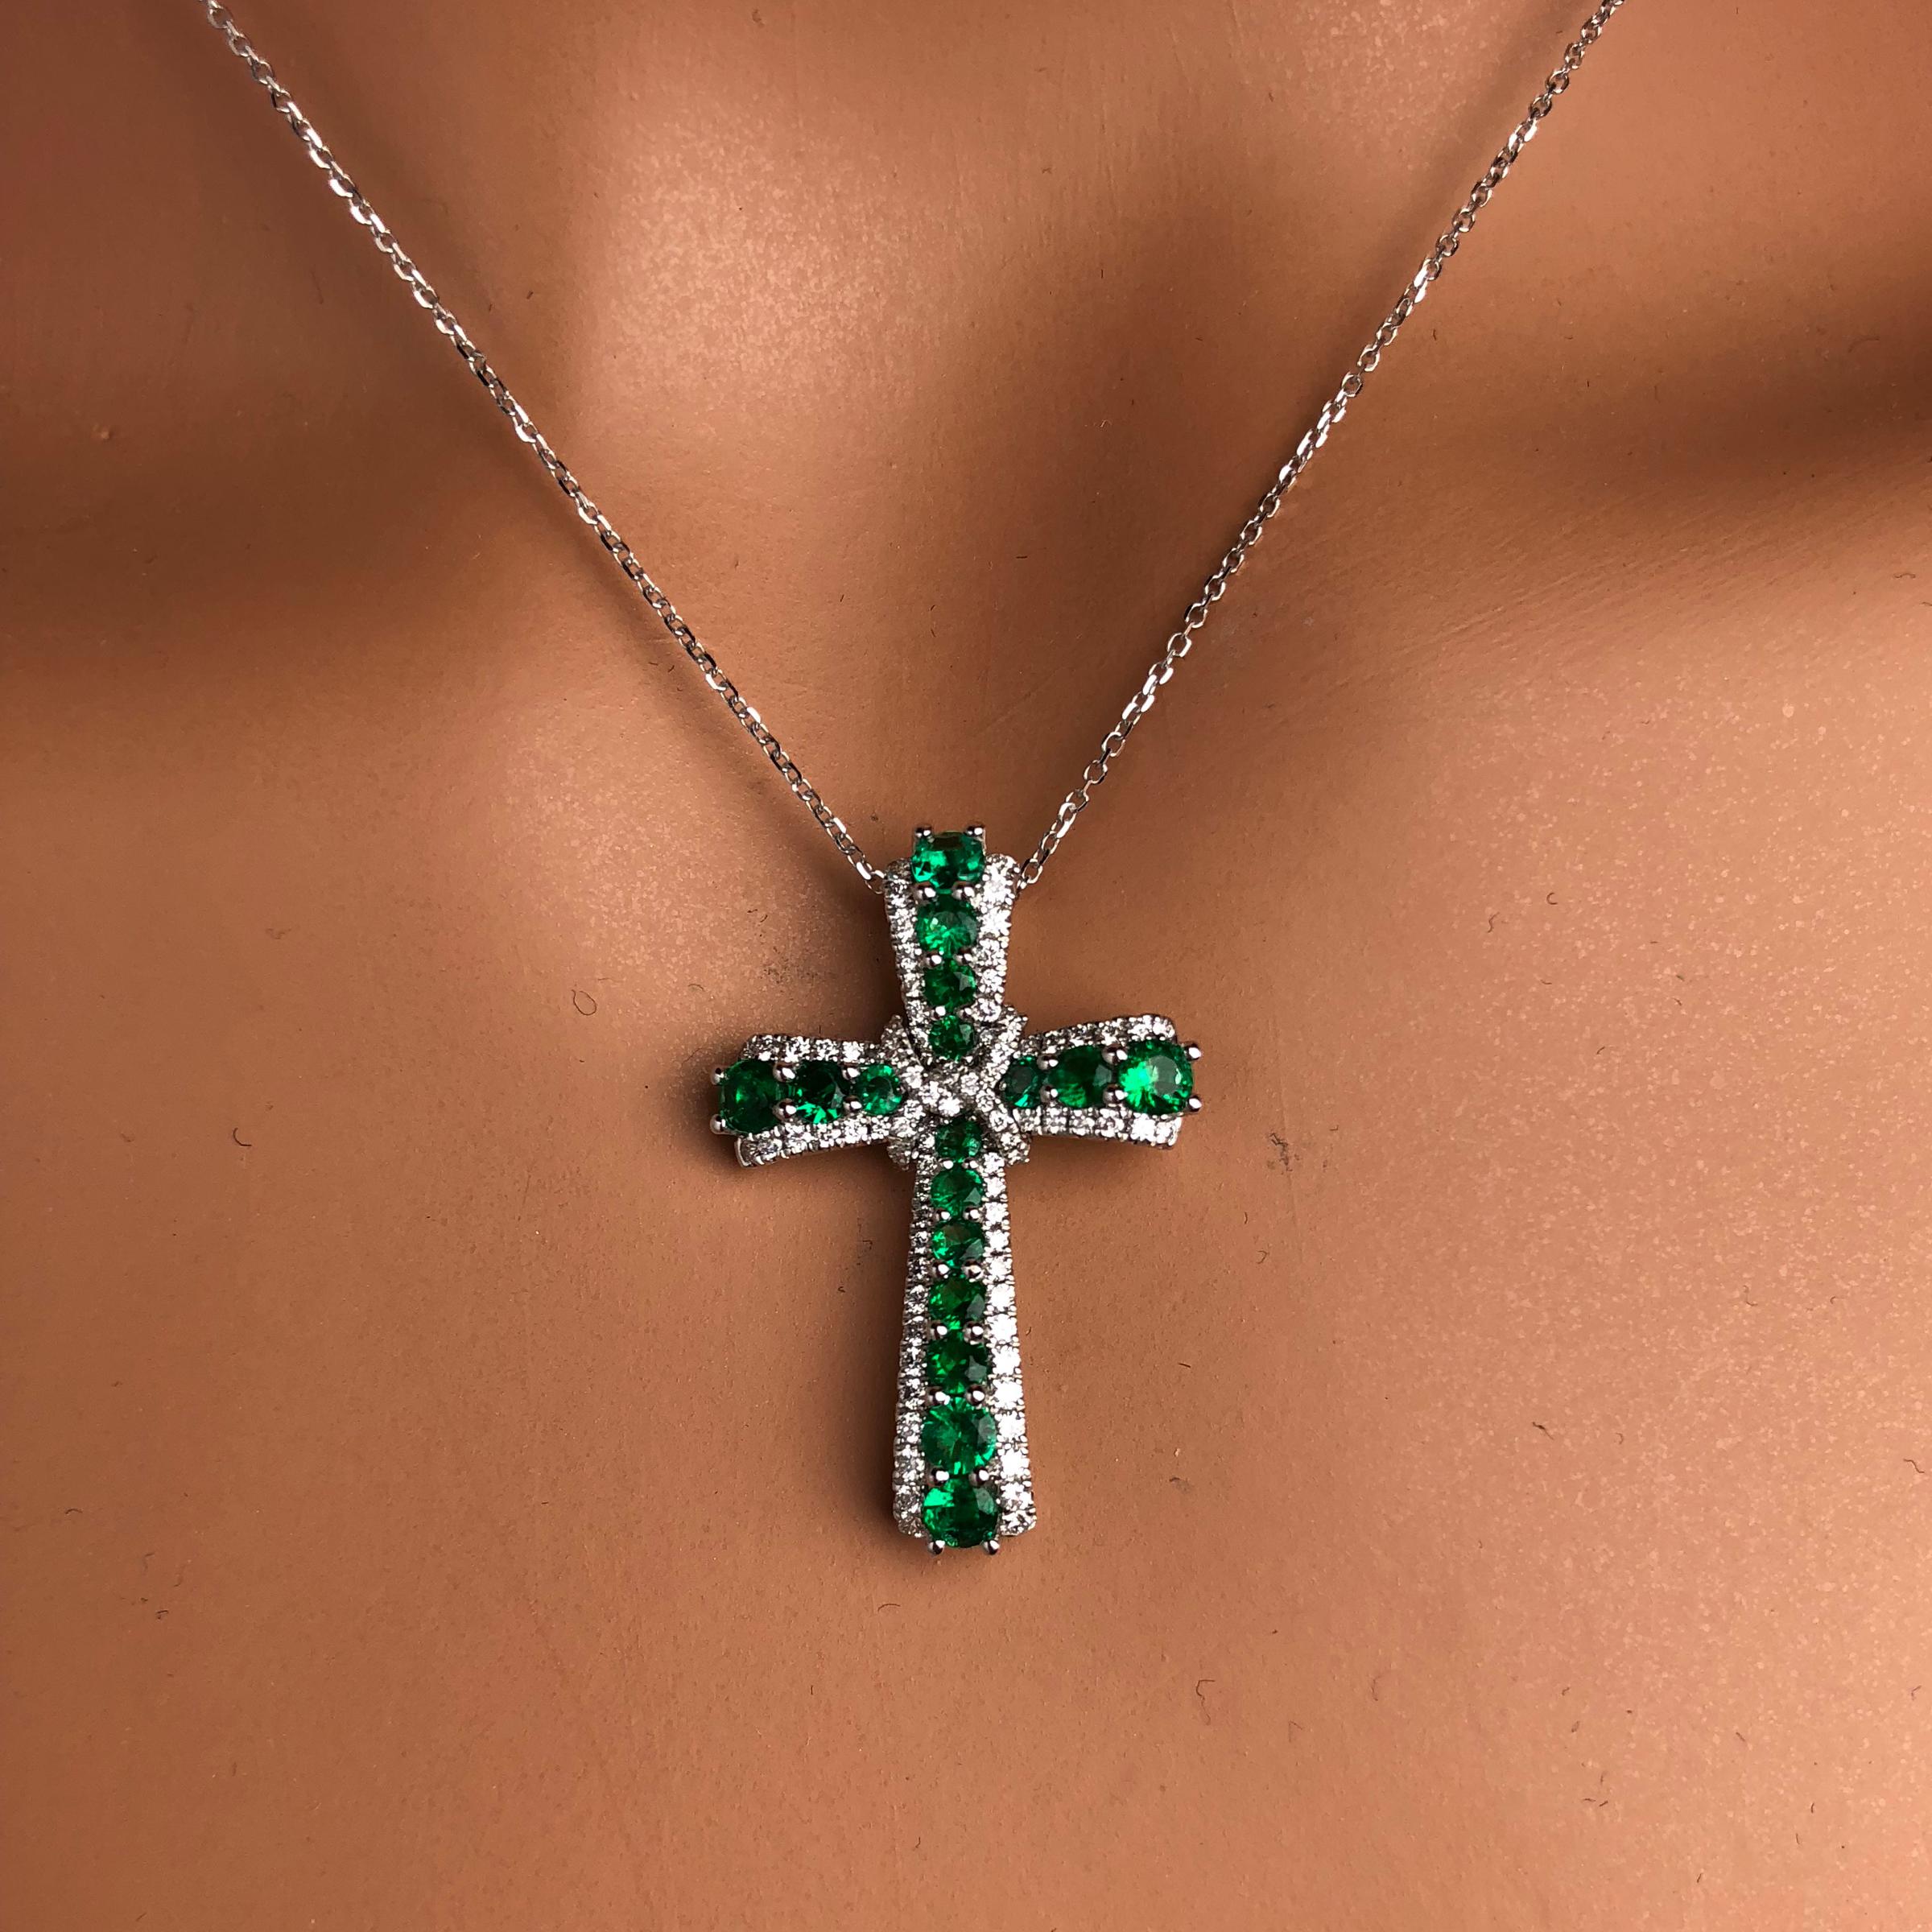 (DiamondTown) This pendant features 0.96 carats emeralds arranged in a cross and surrounded by a halo of white diamonds. An additional diamond embellishment surrounds the center of the cross. The total diamond weight is 0.41 carats.

The emeralds